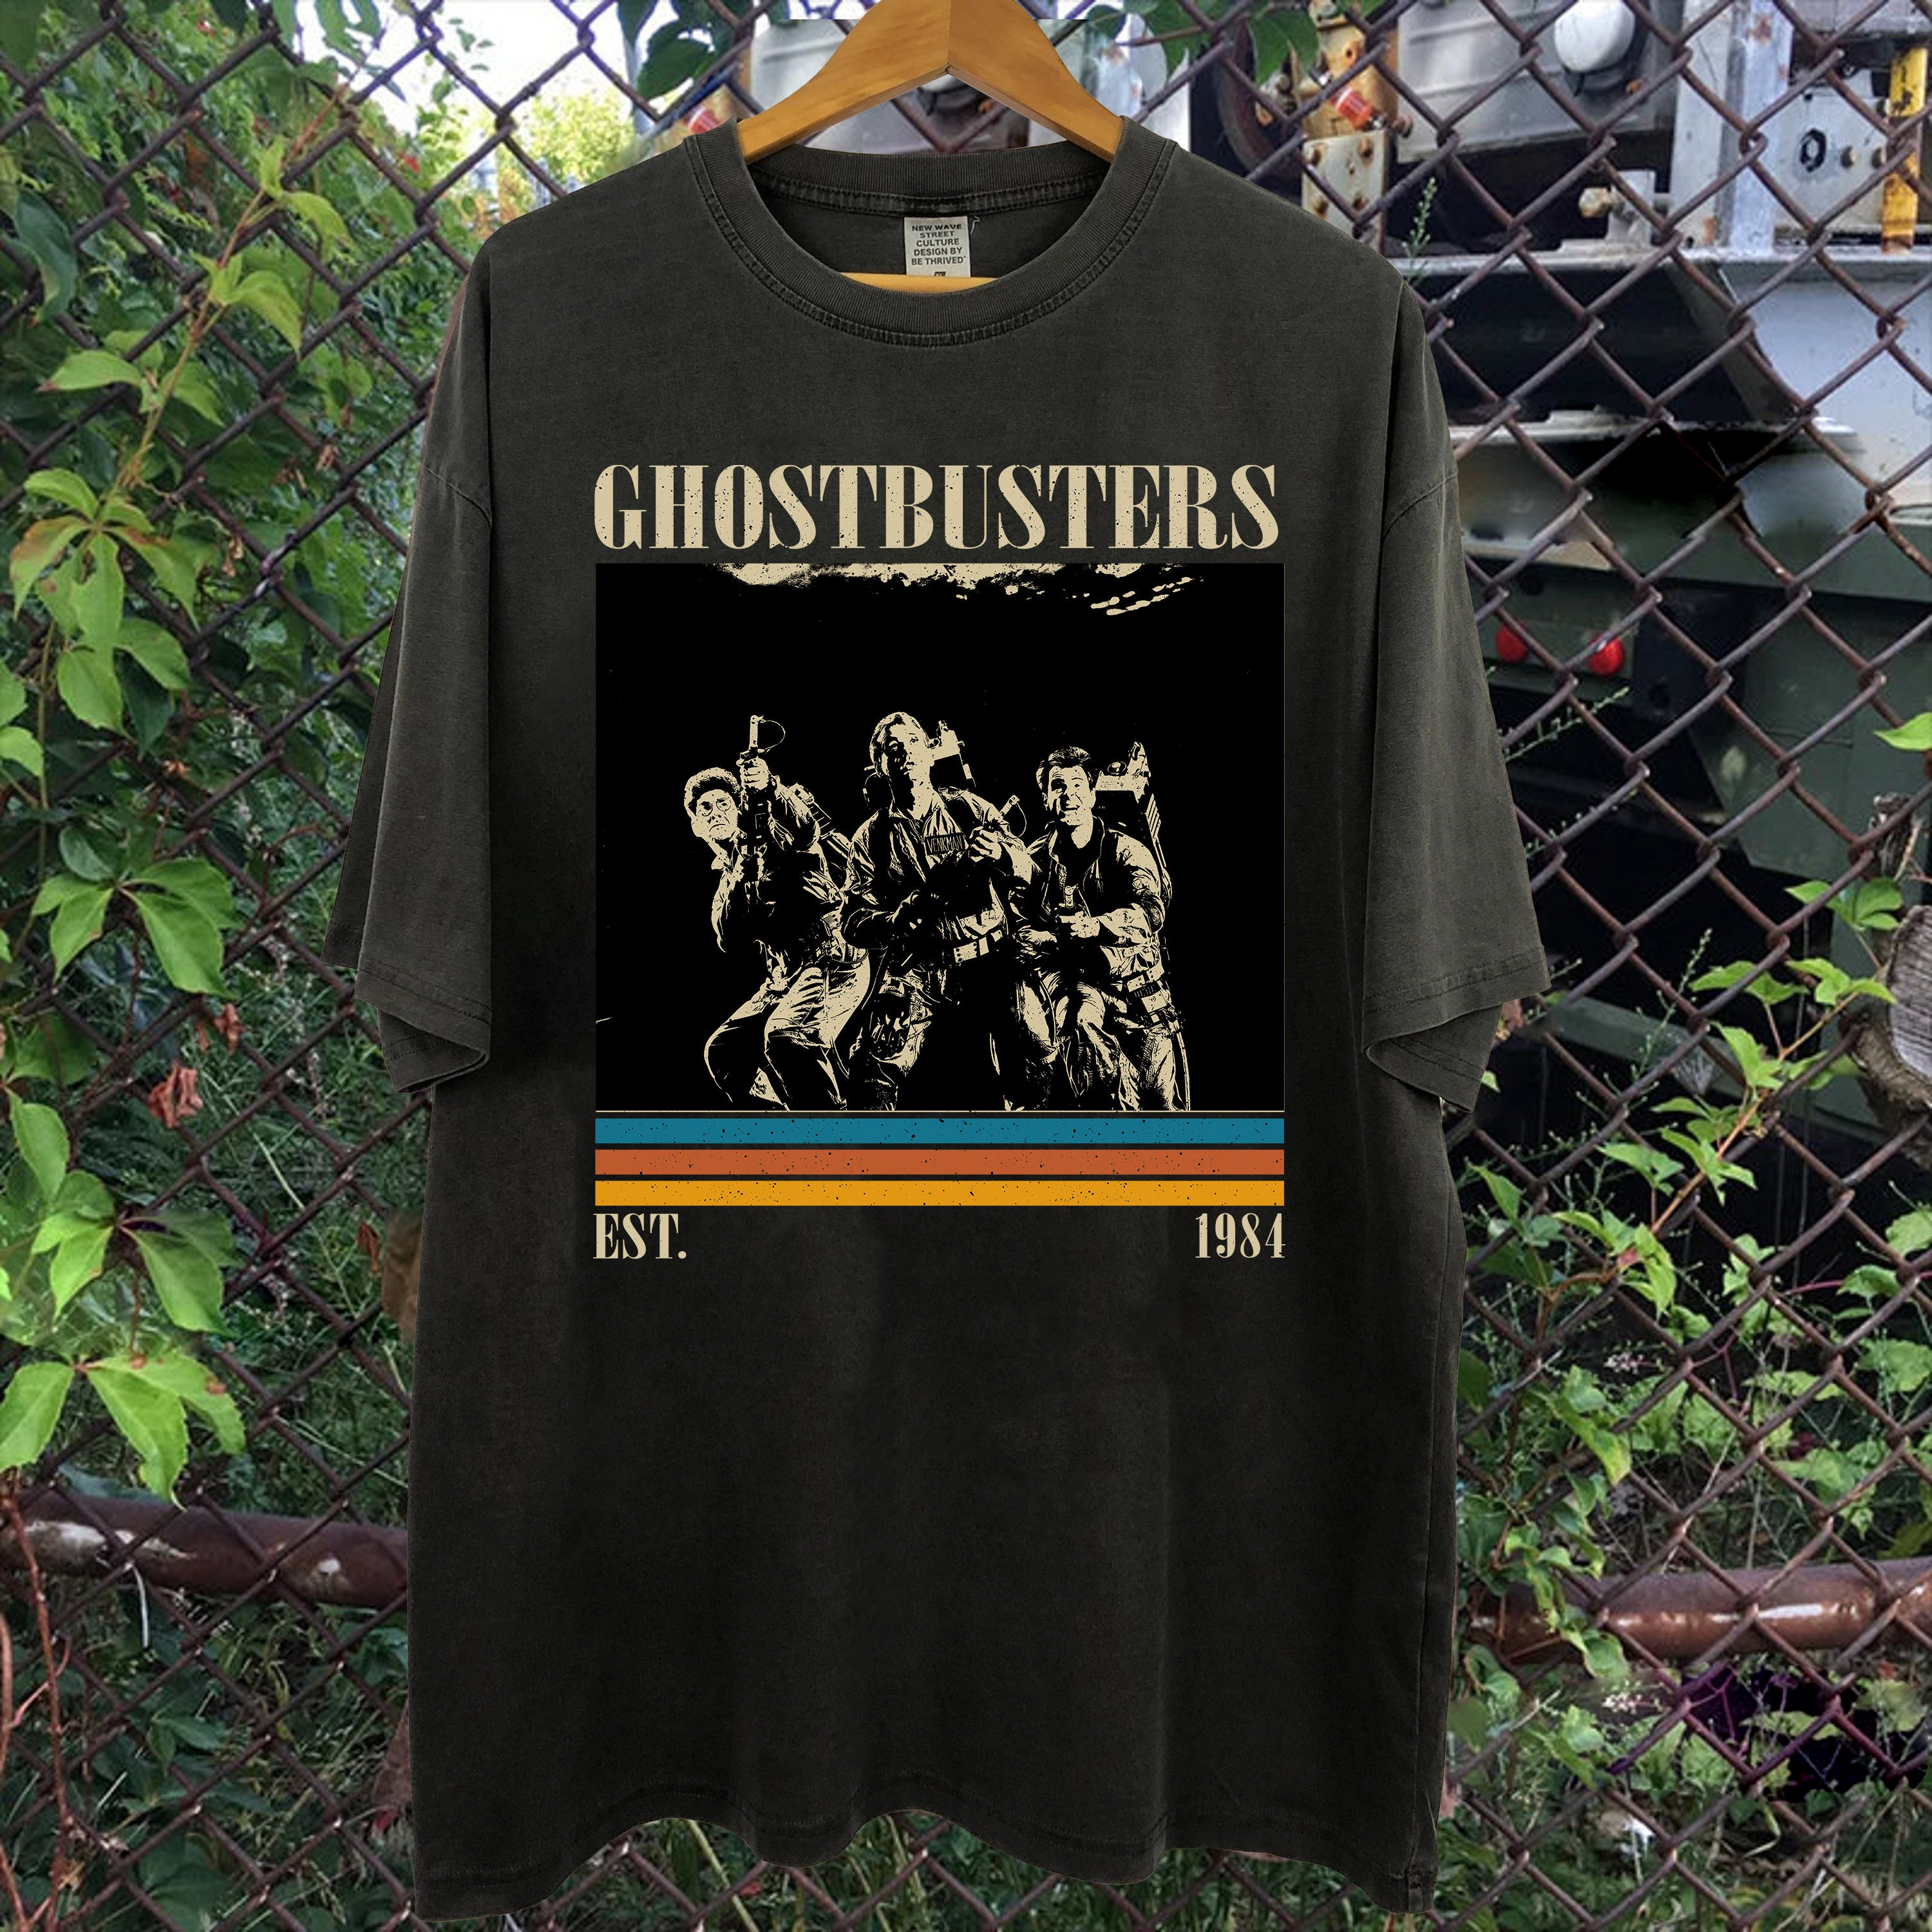 Ghostbusters Shirt Etsy T -